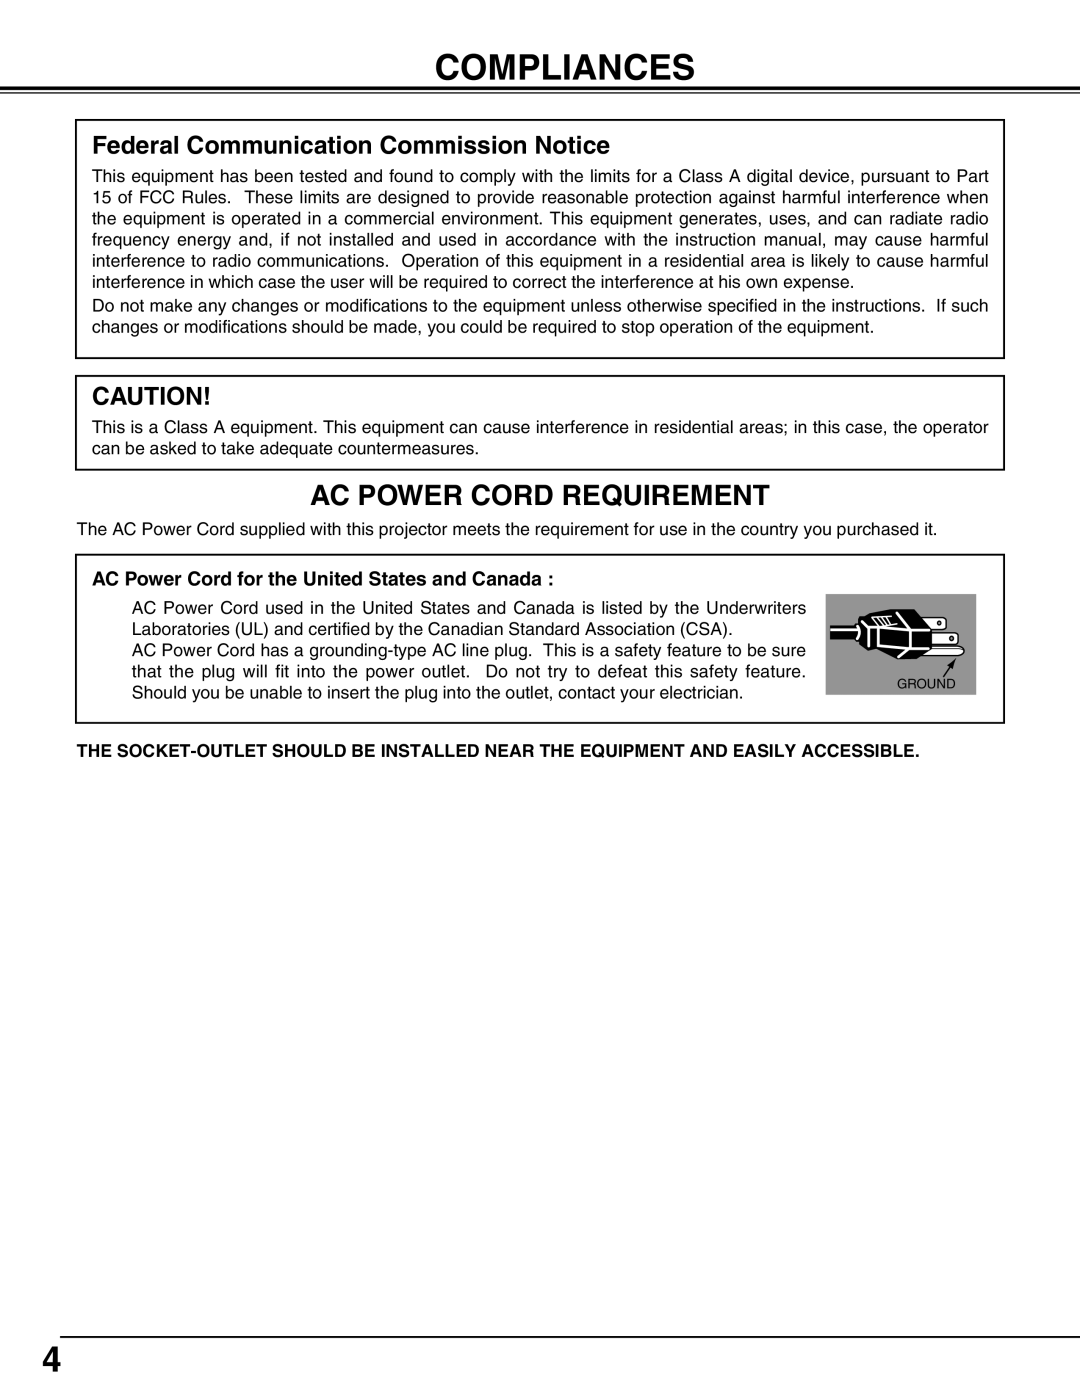 Christie Digital Systems 38-MX2001-01 Compliances, Ac Power Cord Requirement, Federal Communication Commission Notice 